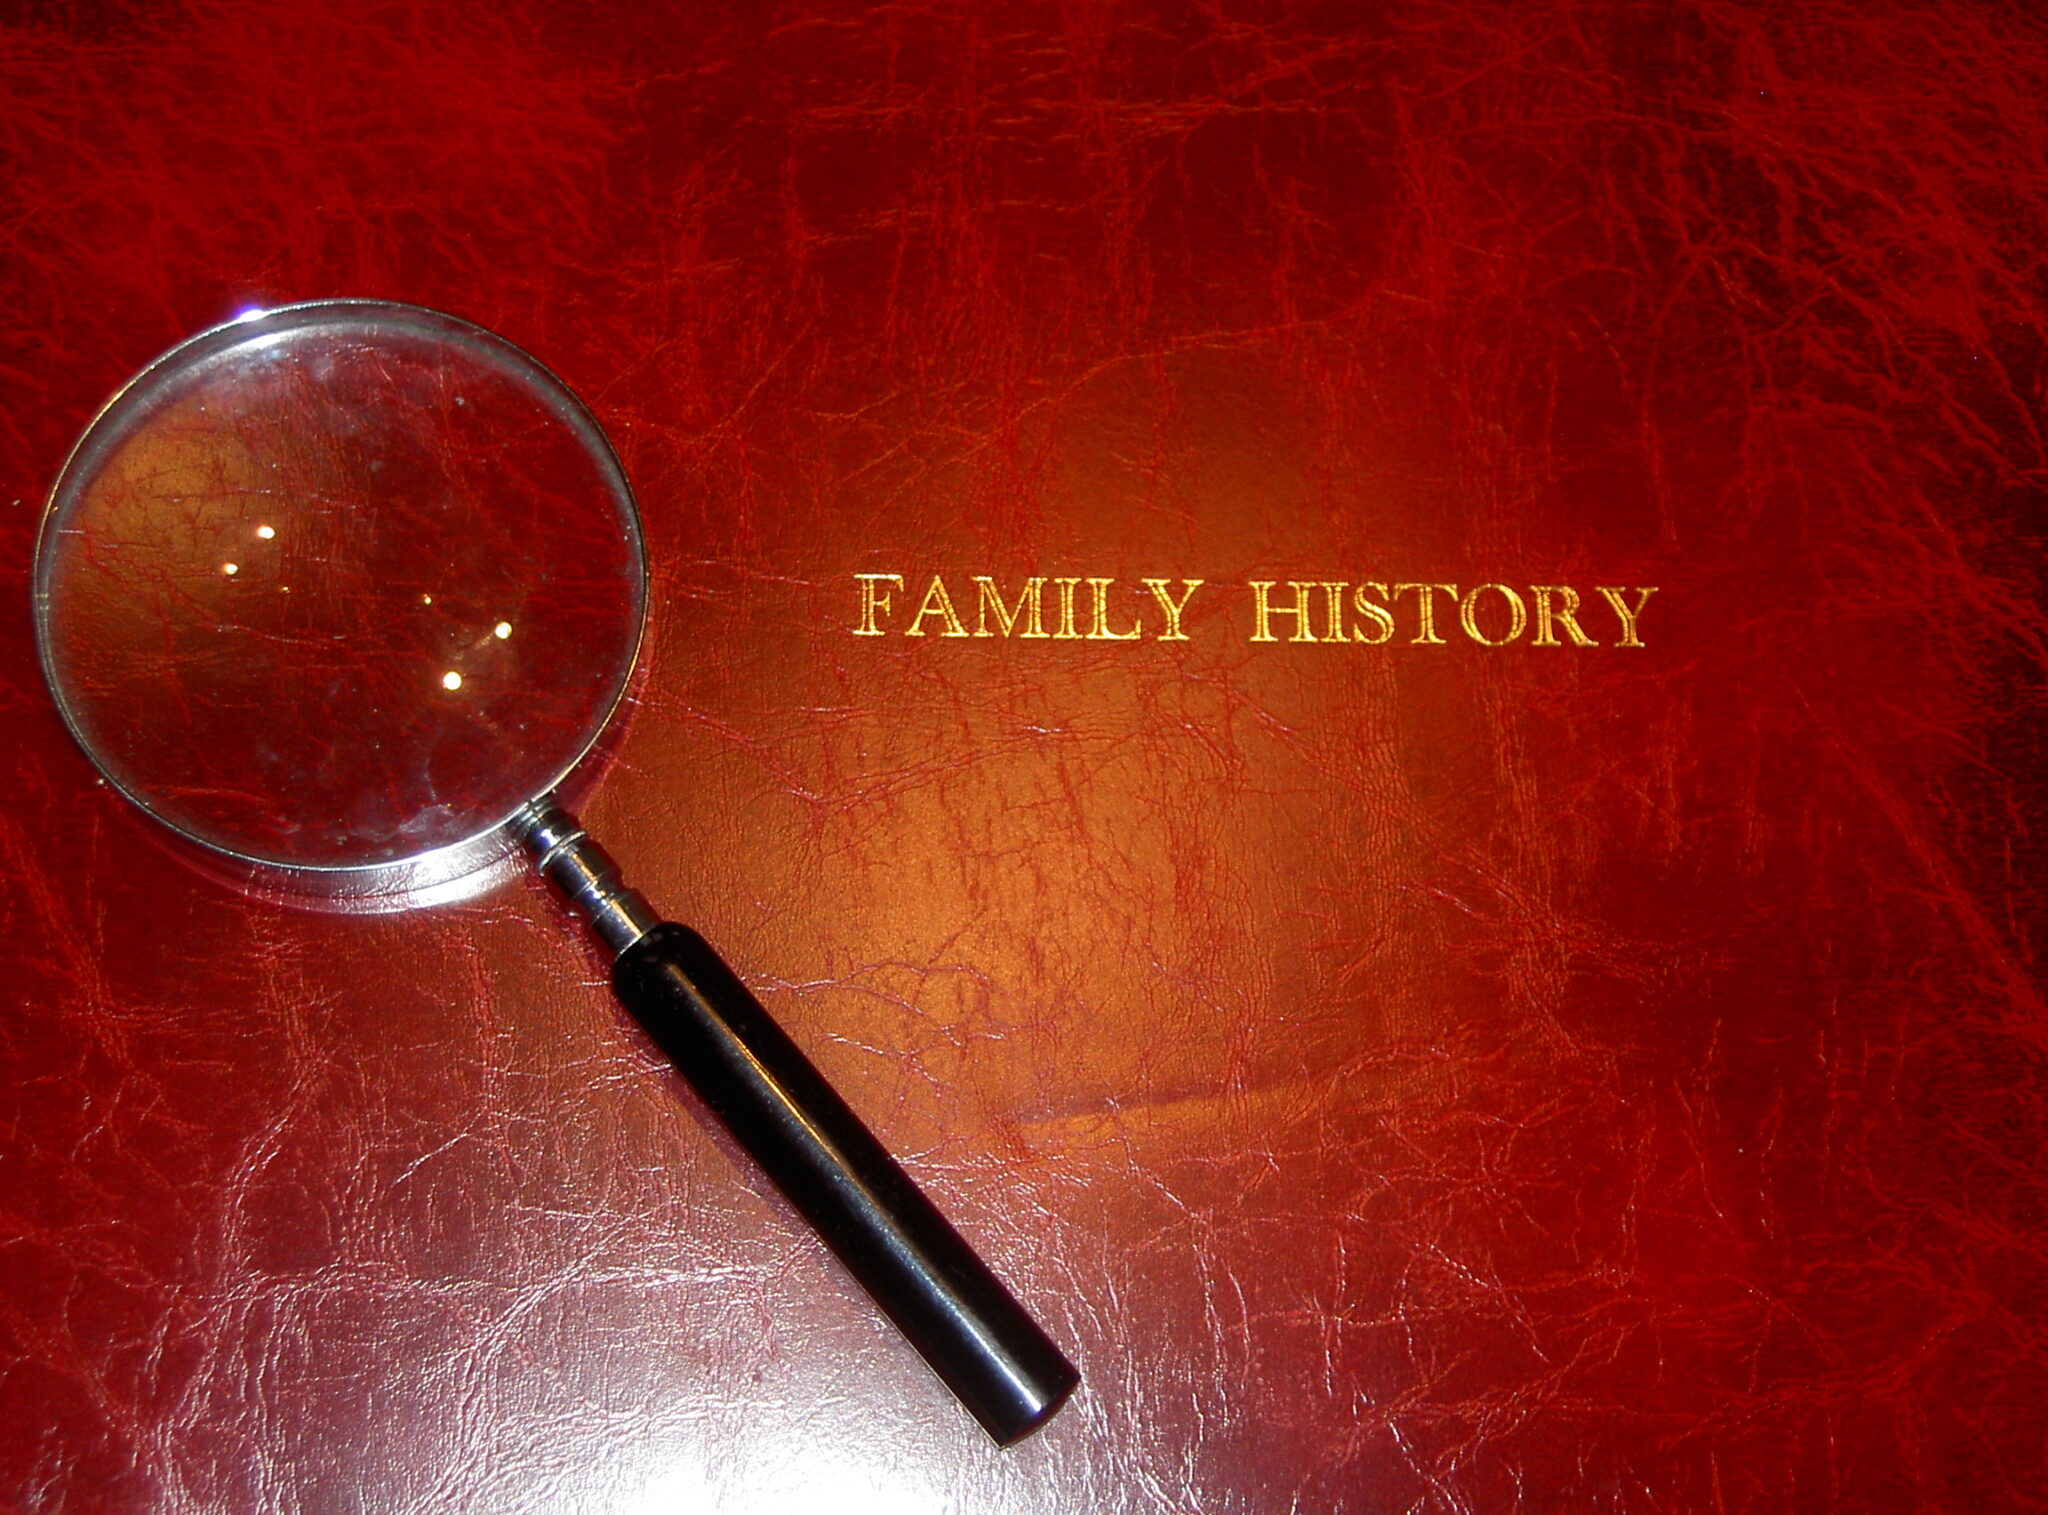 Family History binder and magnifying glass